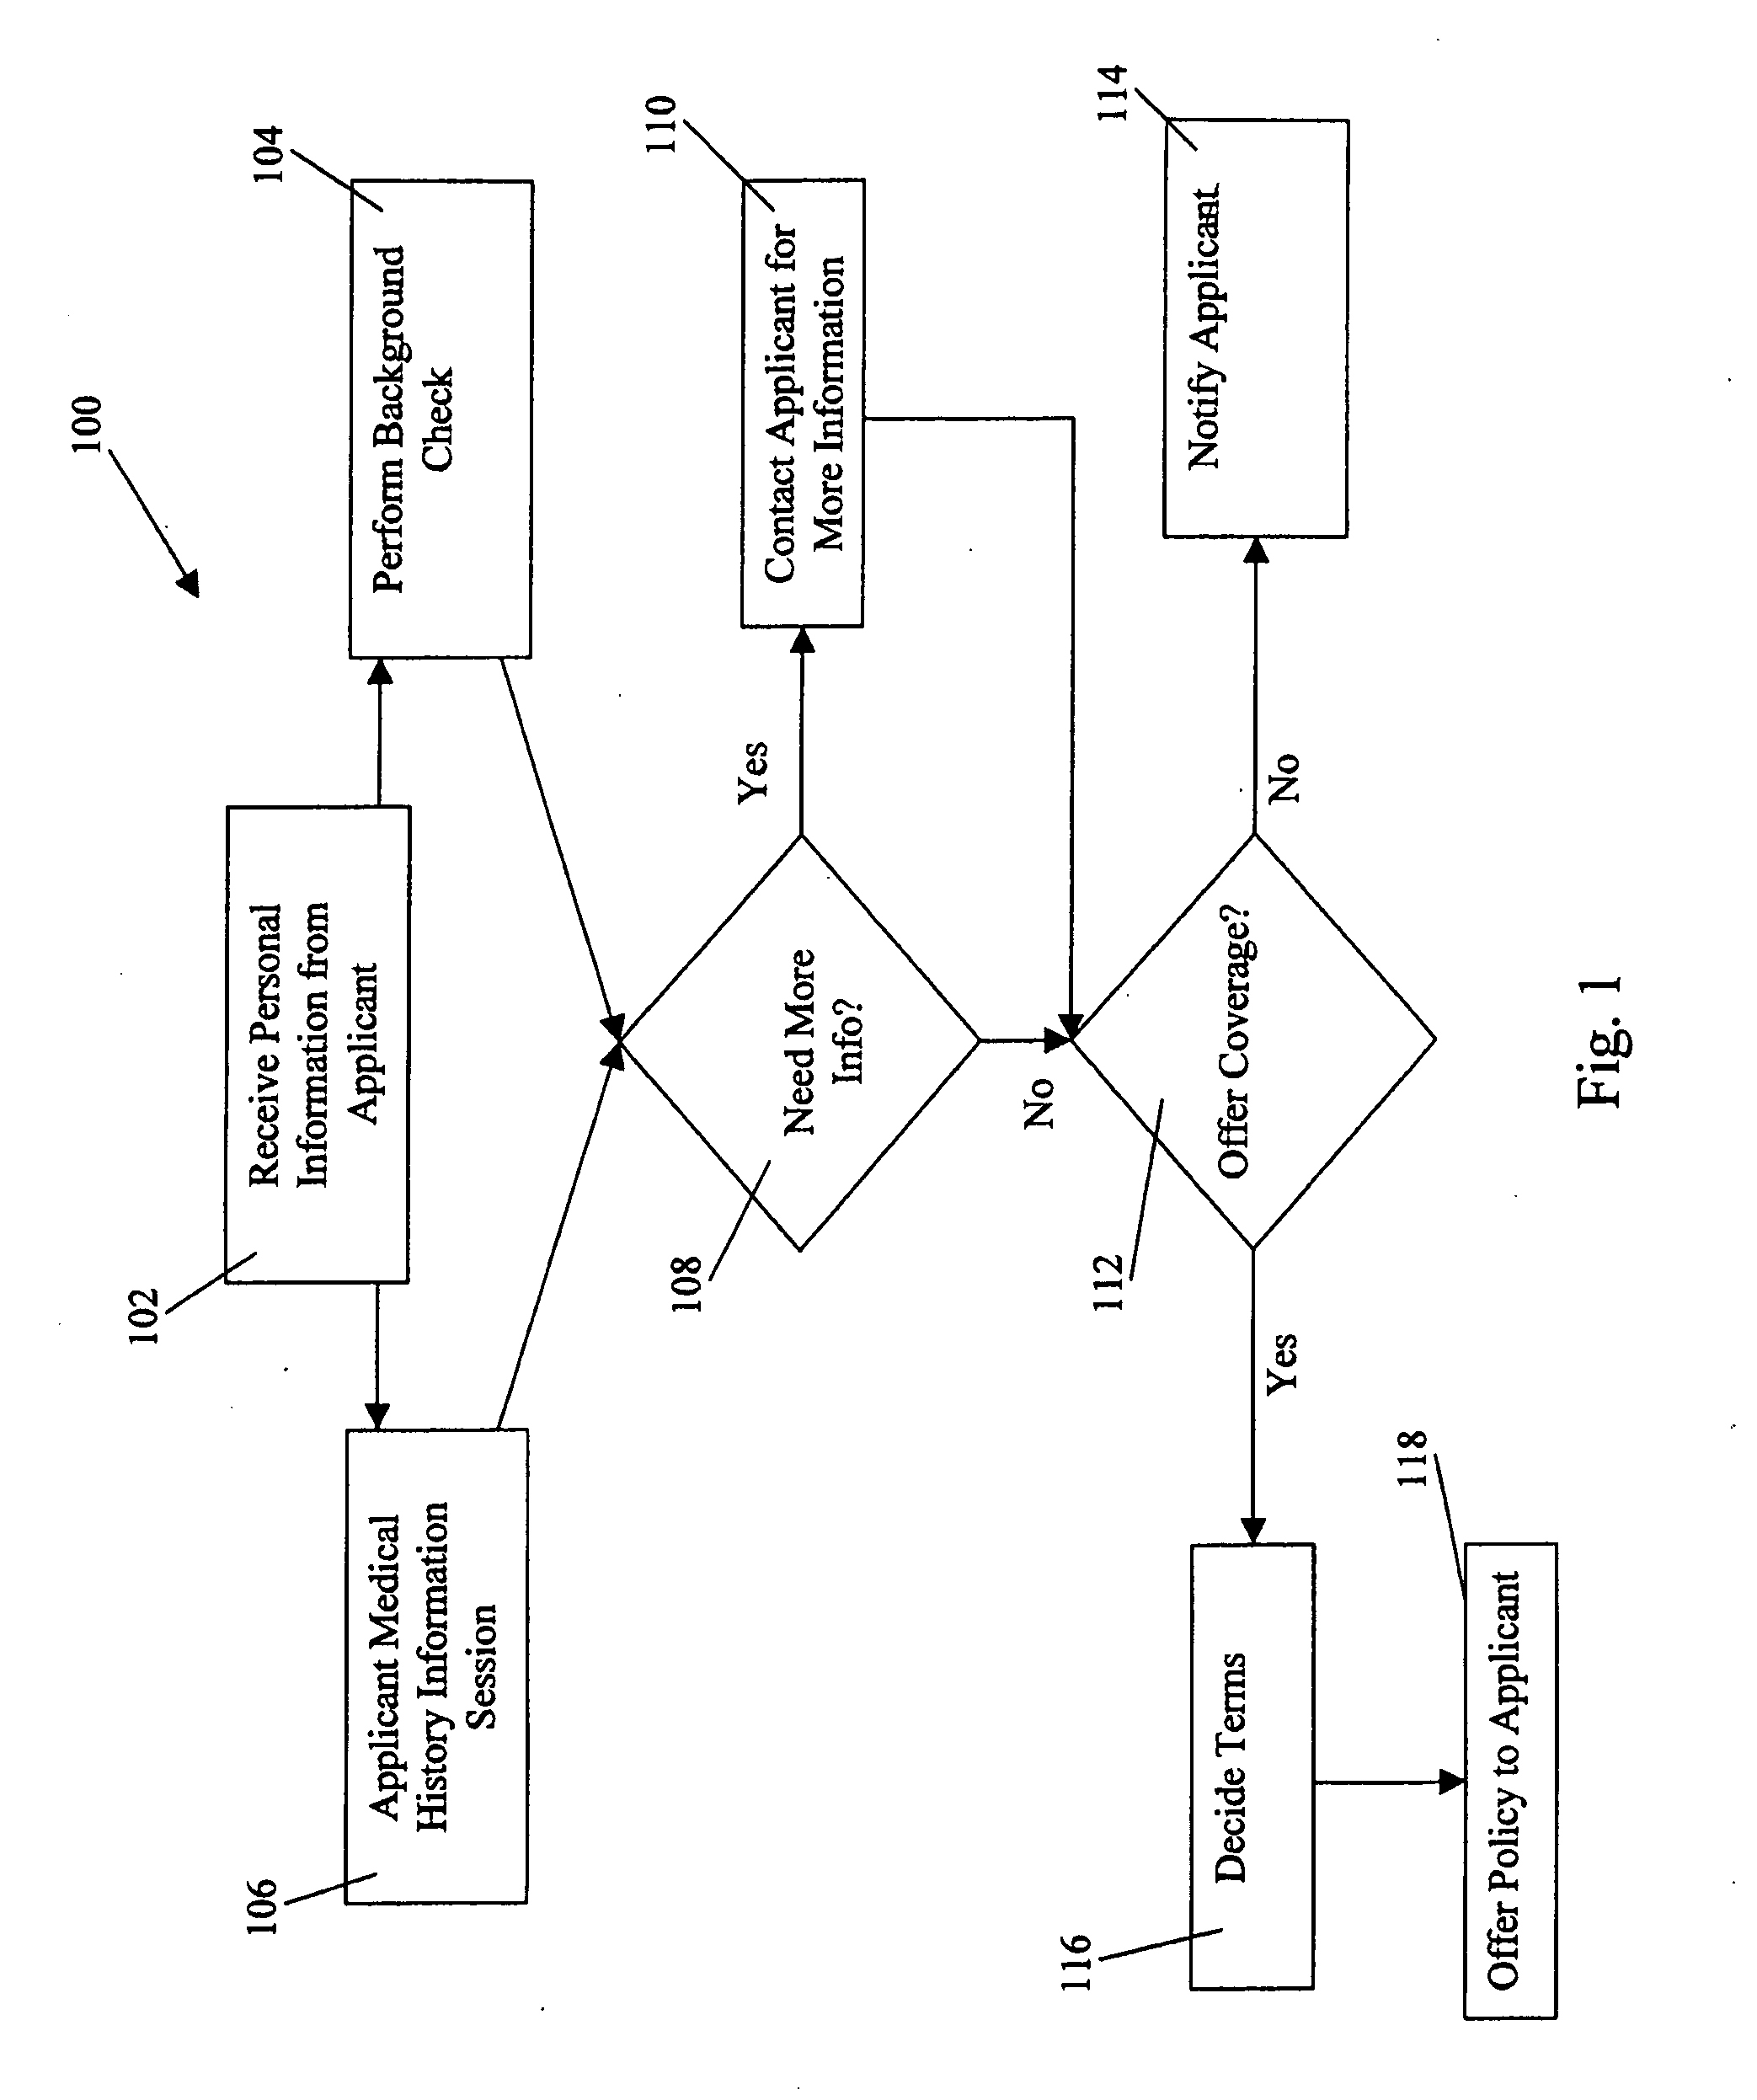 Systems and methods for providing health insurance coverage